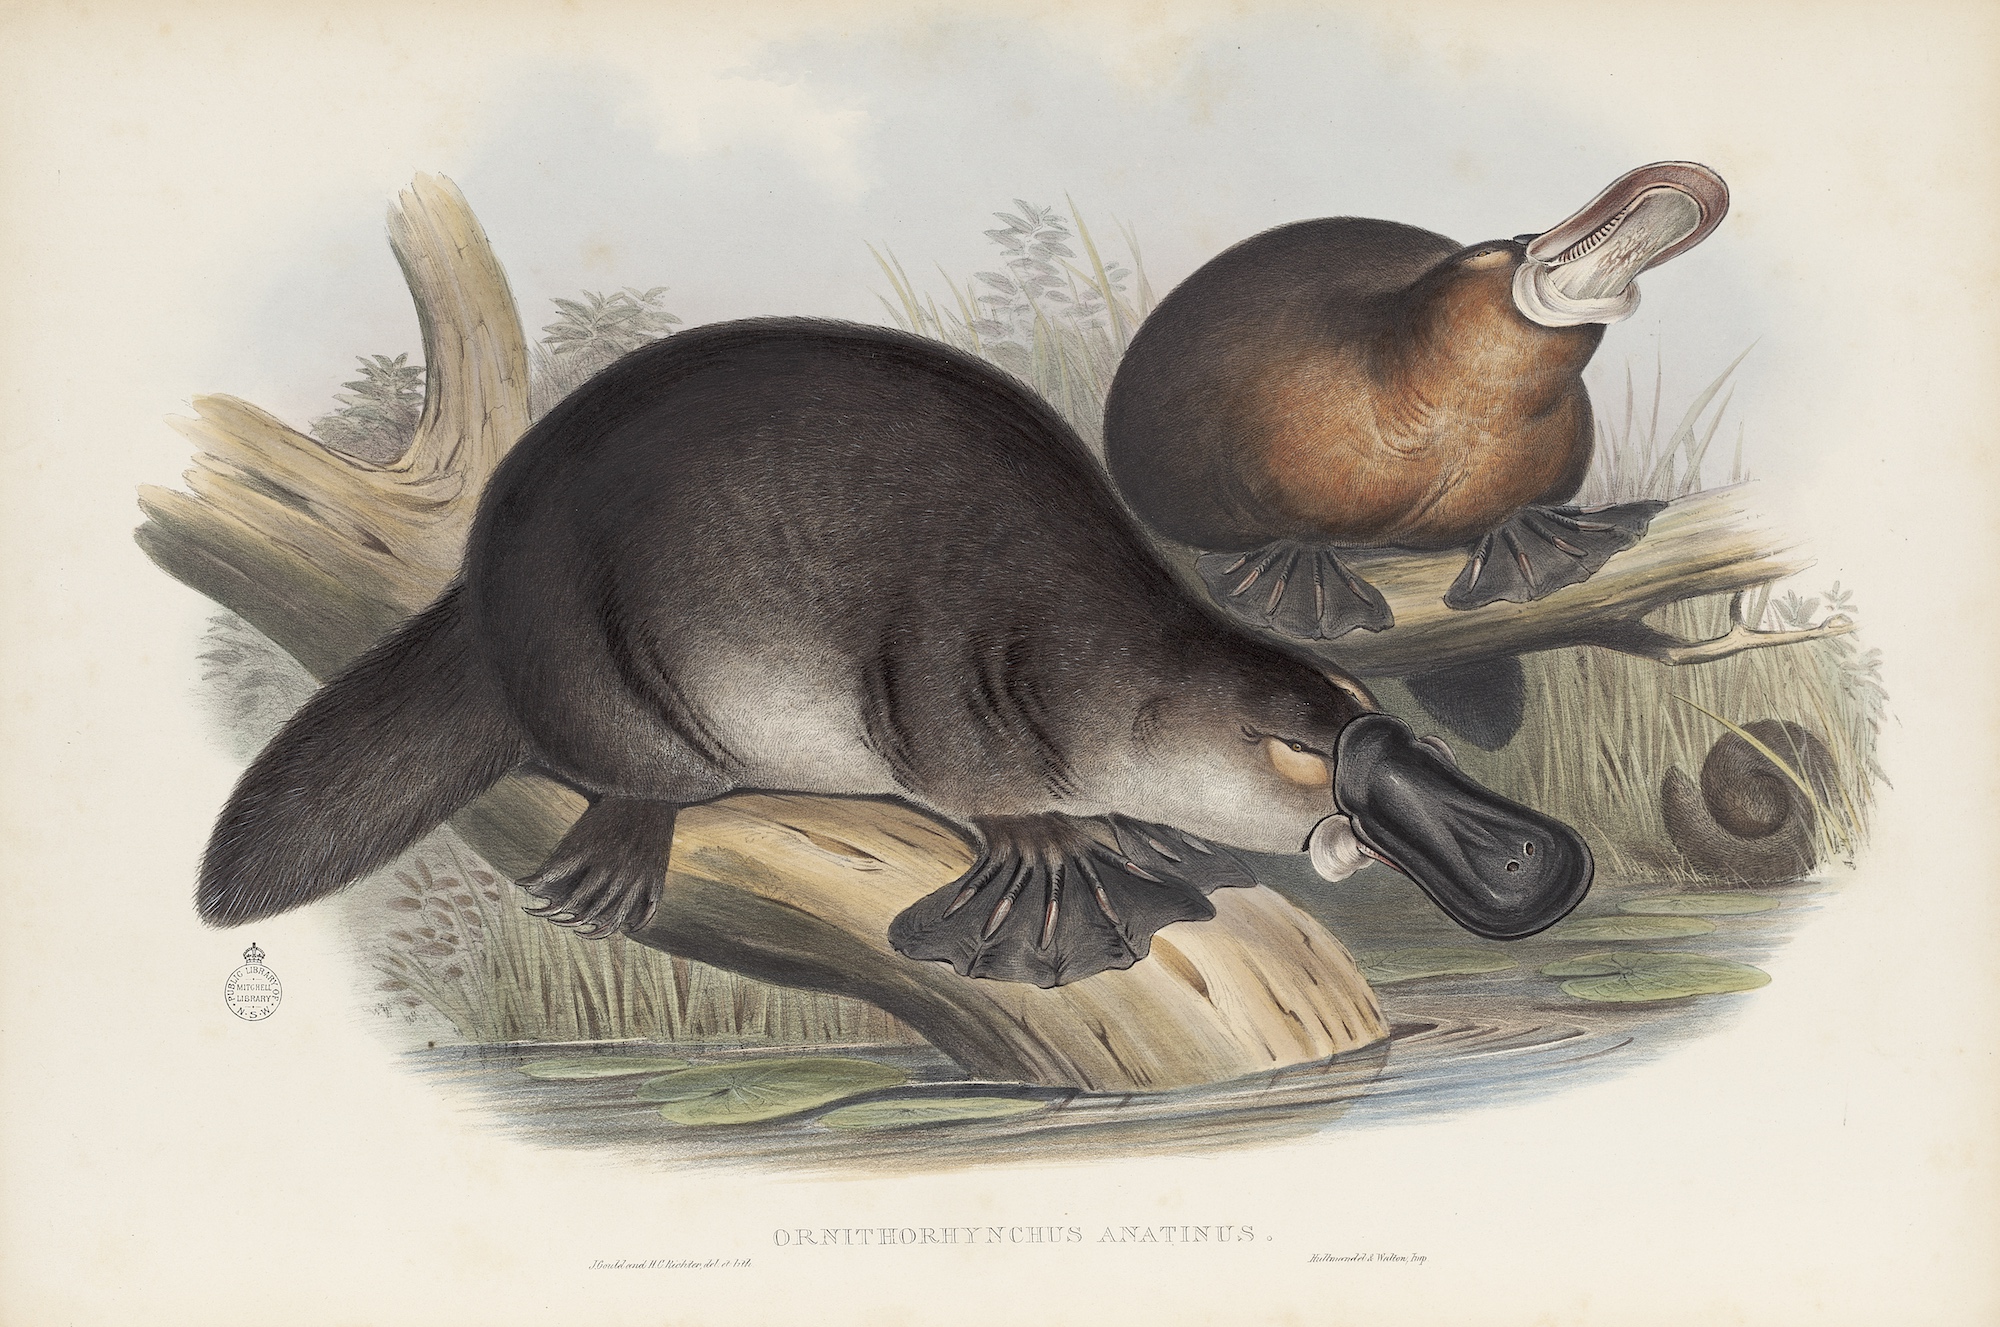 Duck-billed platypus in The Mammals of Australia | State Library of NSW